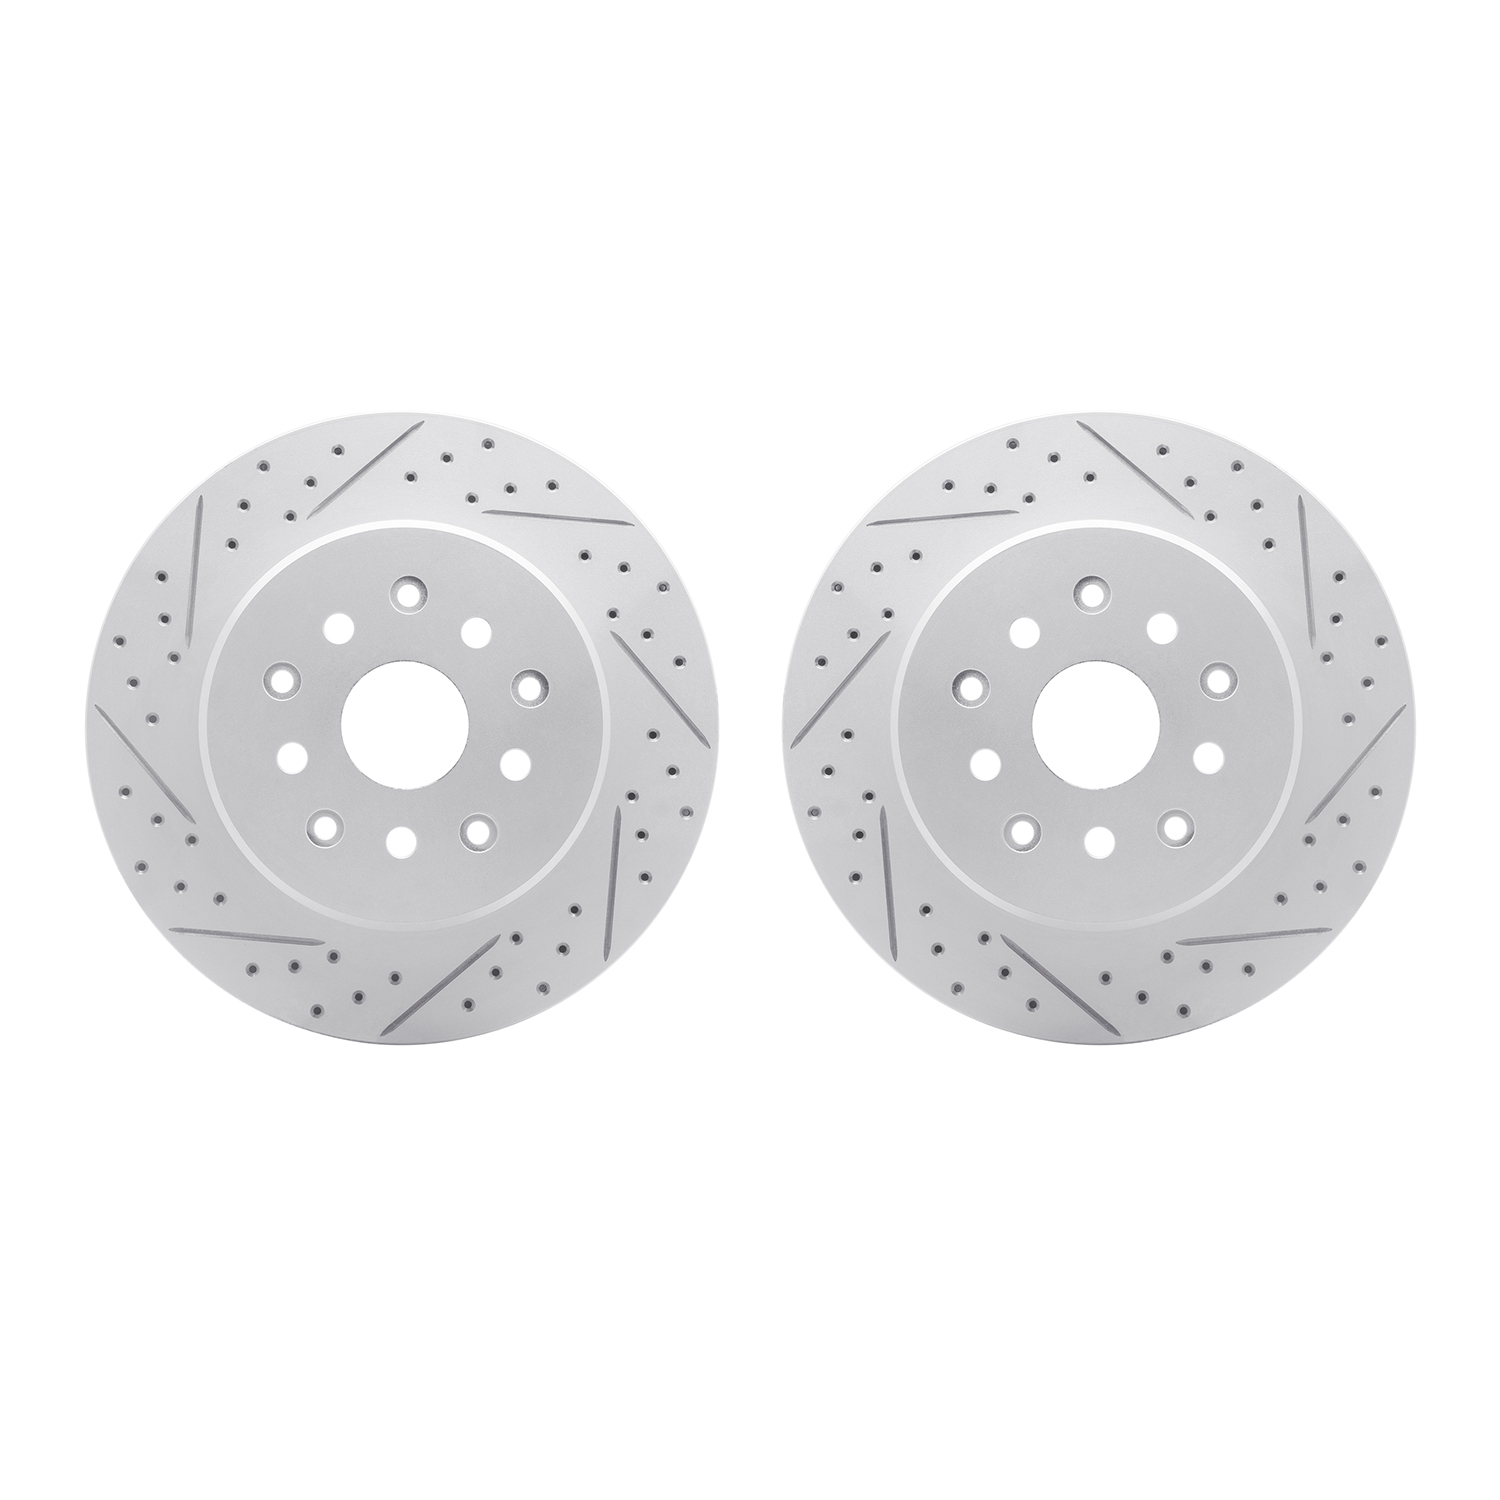 2002-76067 Geoperformance Drilled/Slotted Brake Rotors, 1993-1998 Lexus/Toyota/Scion, Position: Rear